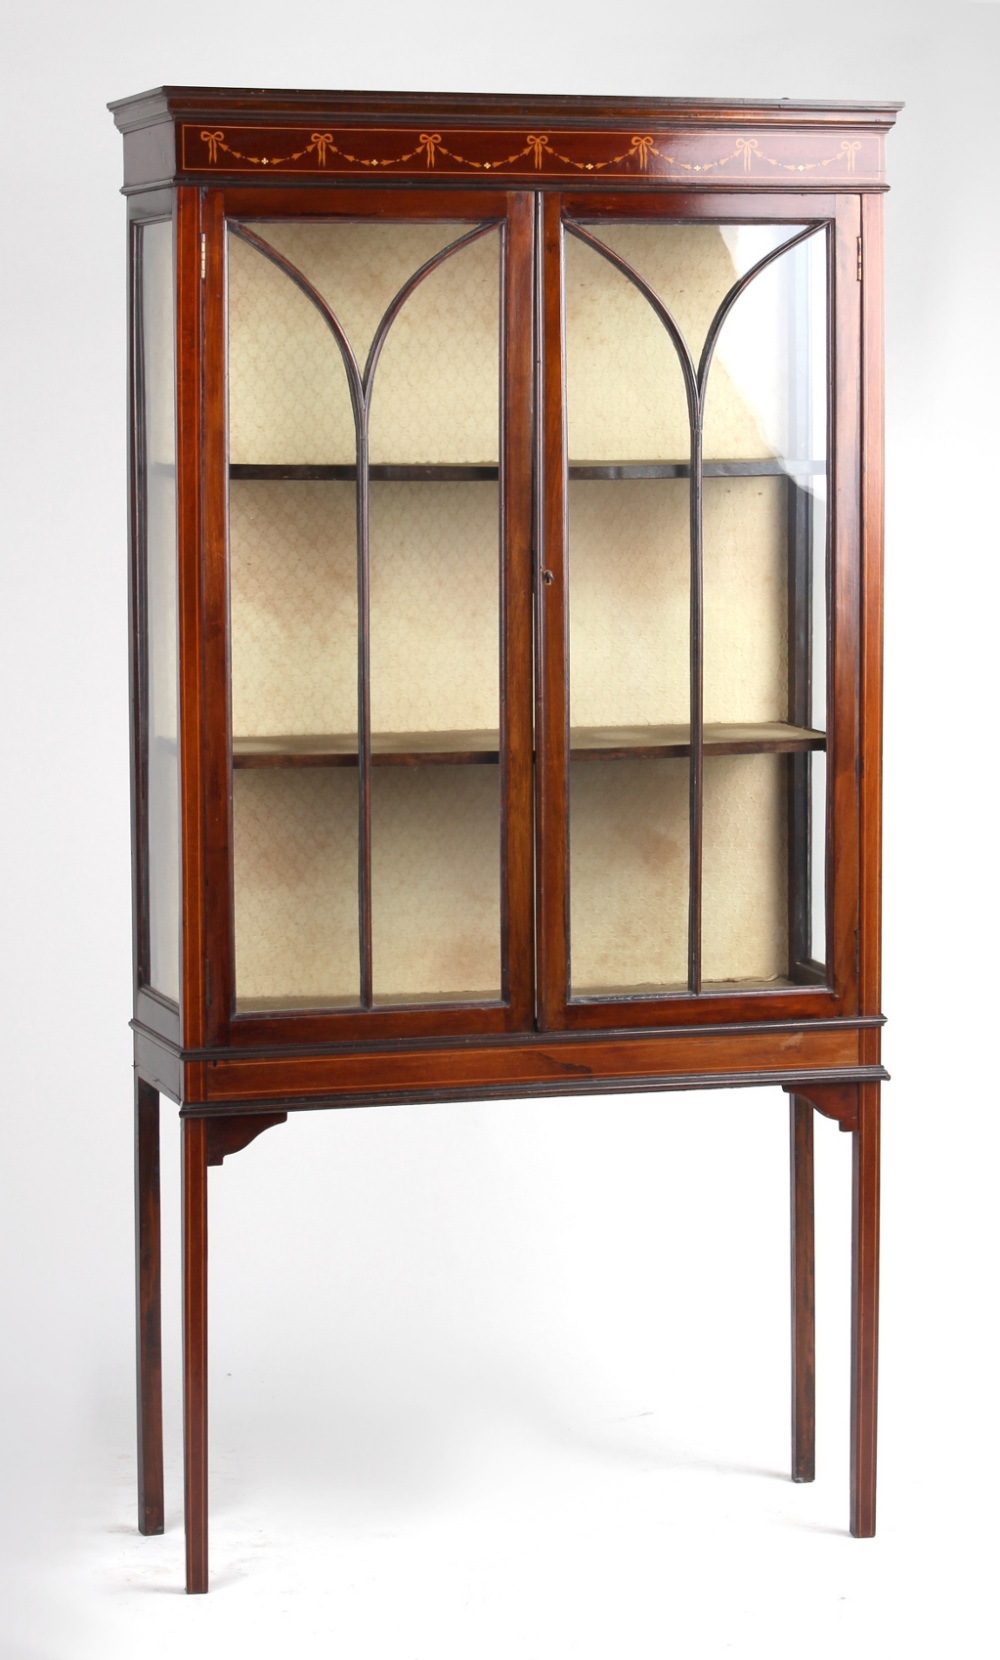 Property of a deceased estate - an Edwardian two-door china display cabinet with ribbon & bell